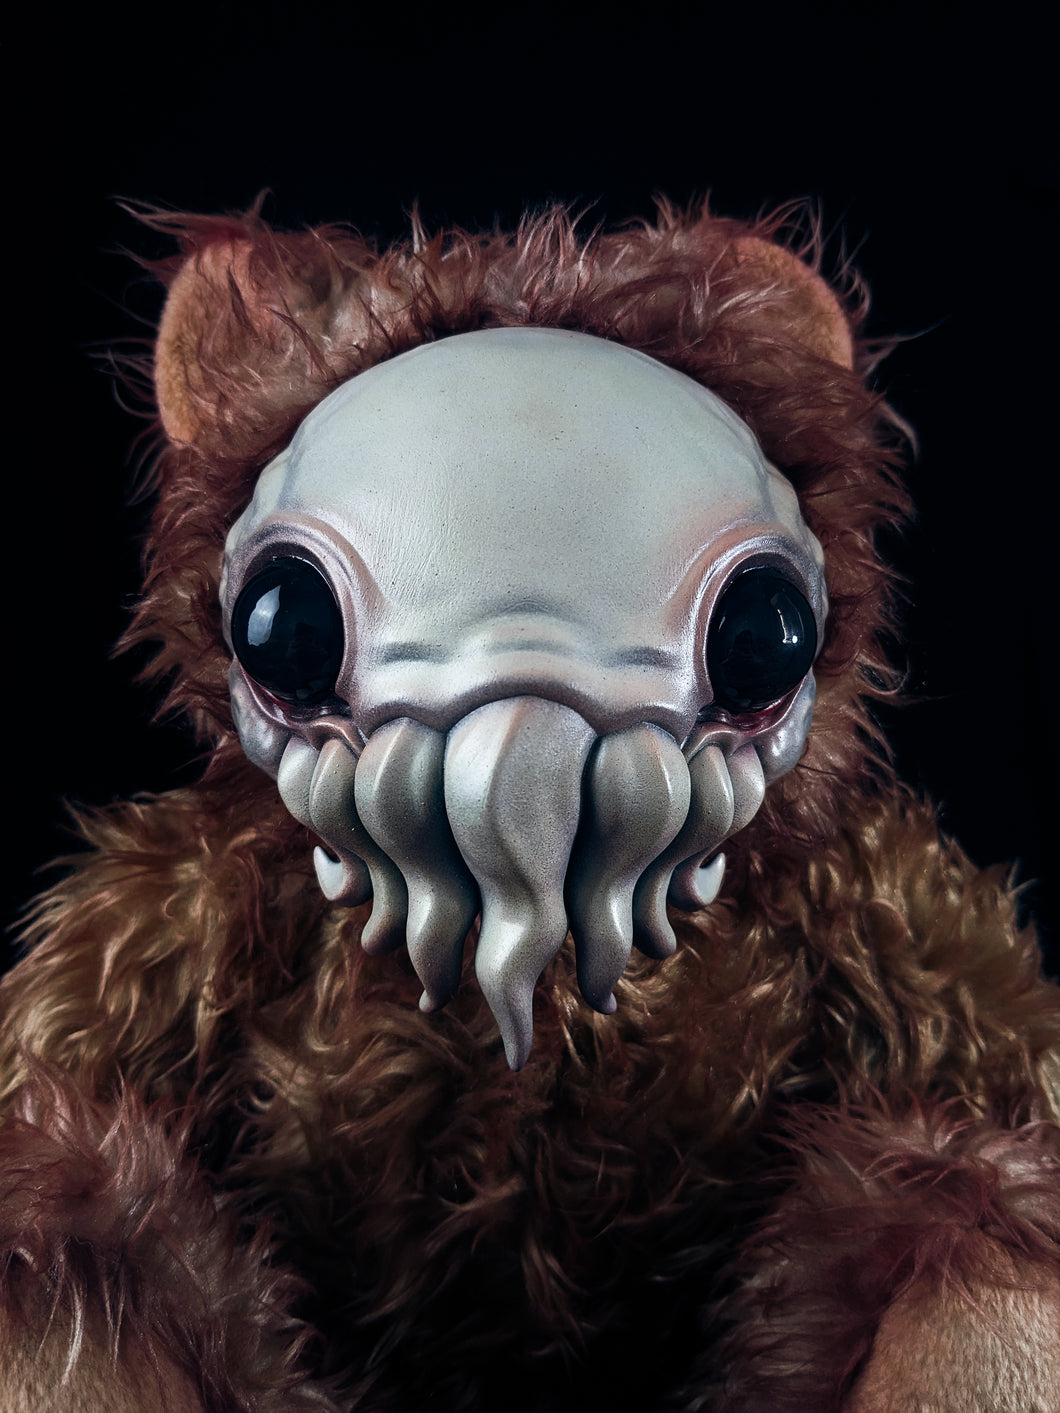 Pale Conjuring: ELDINUTH - CRYPTCRITS Handcrafted Lovecraftian Cthulhu Art Doll Plush Toy for Eldritch Entities